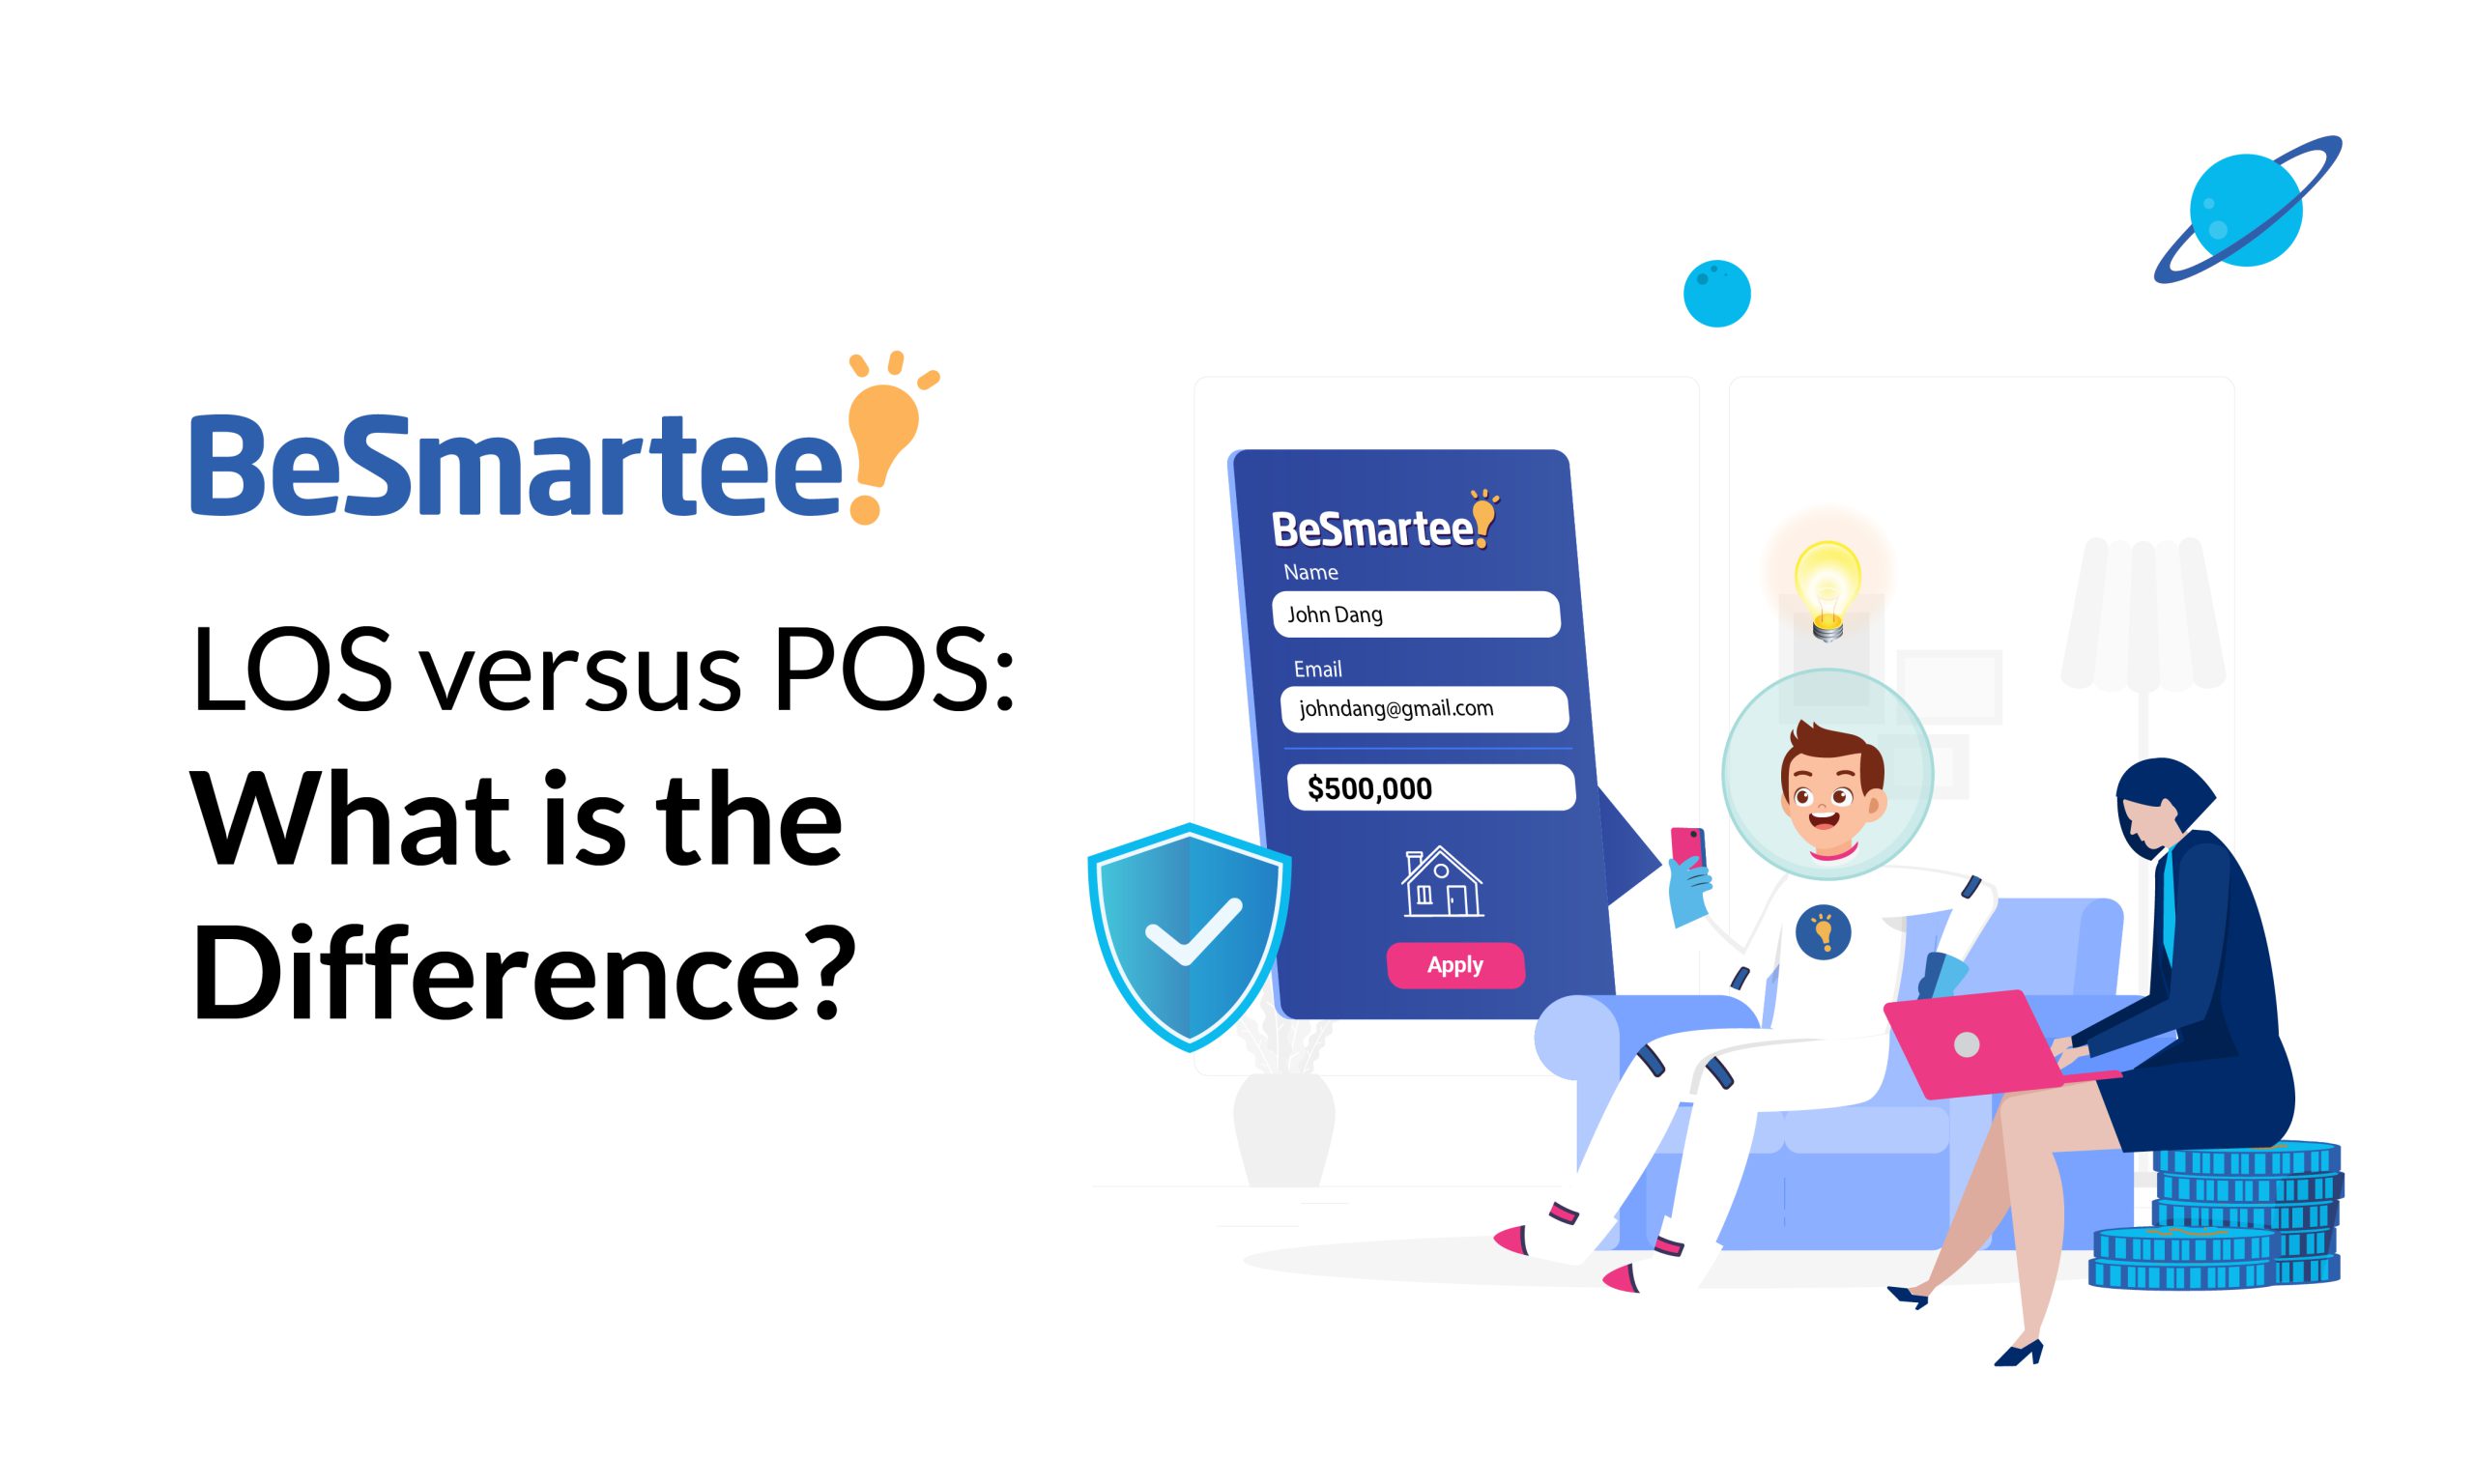 LOS versus POS: What is the Difference?